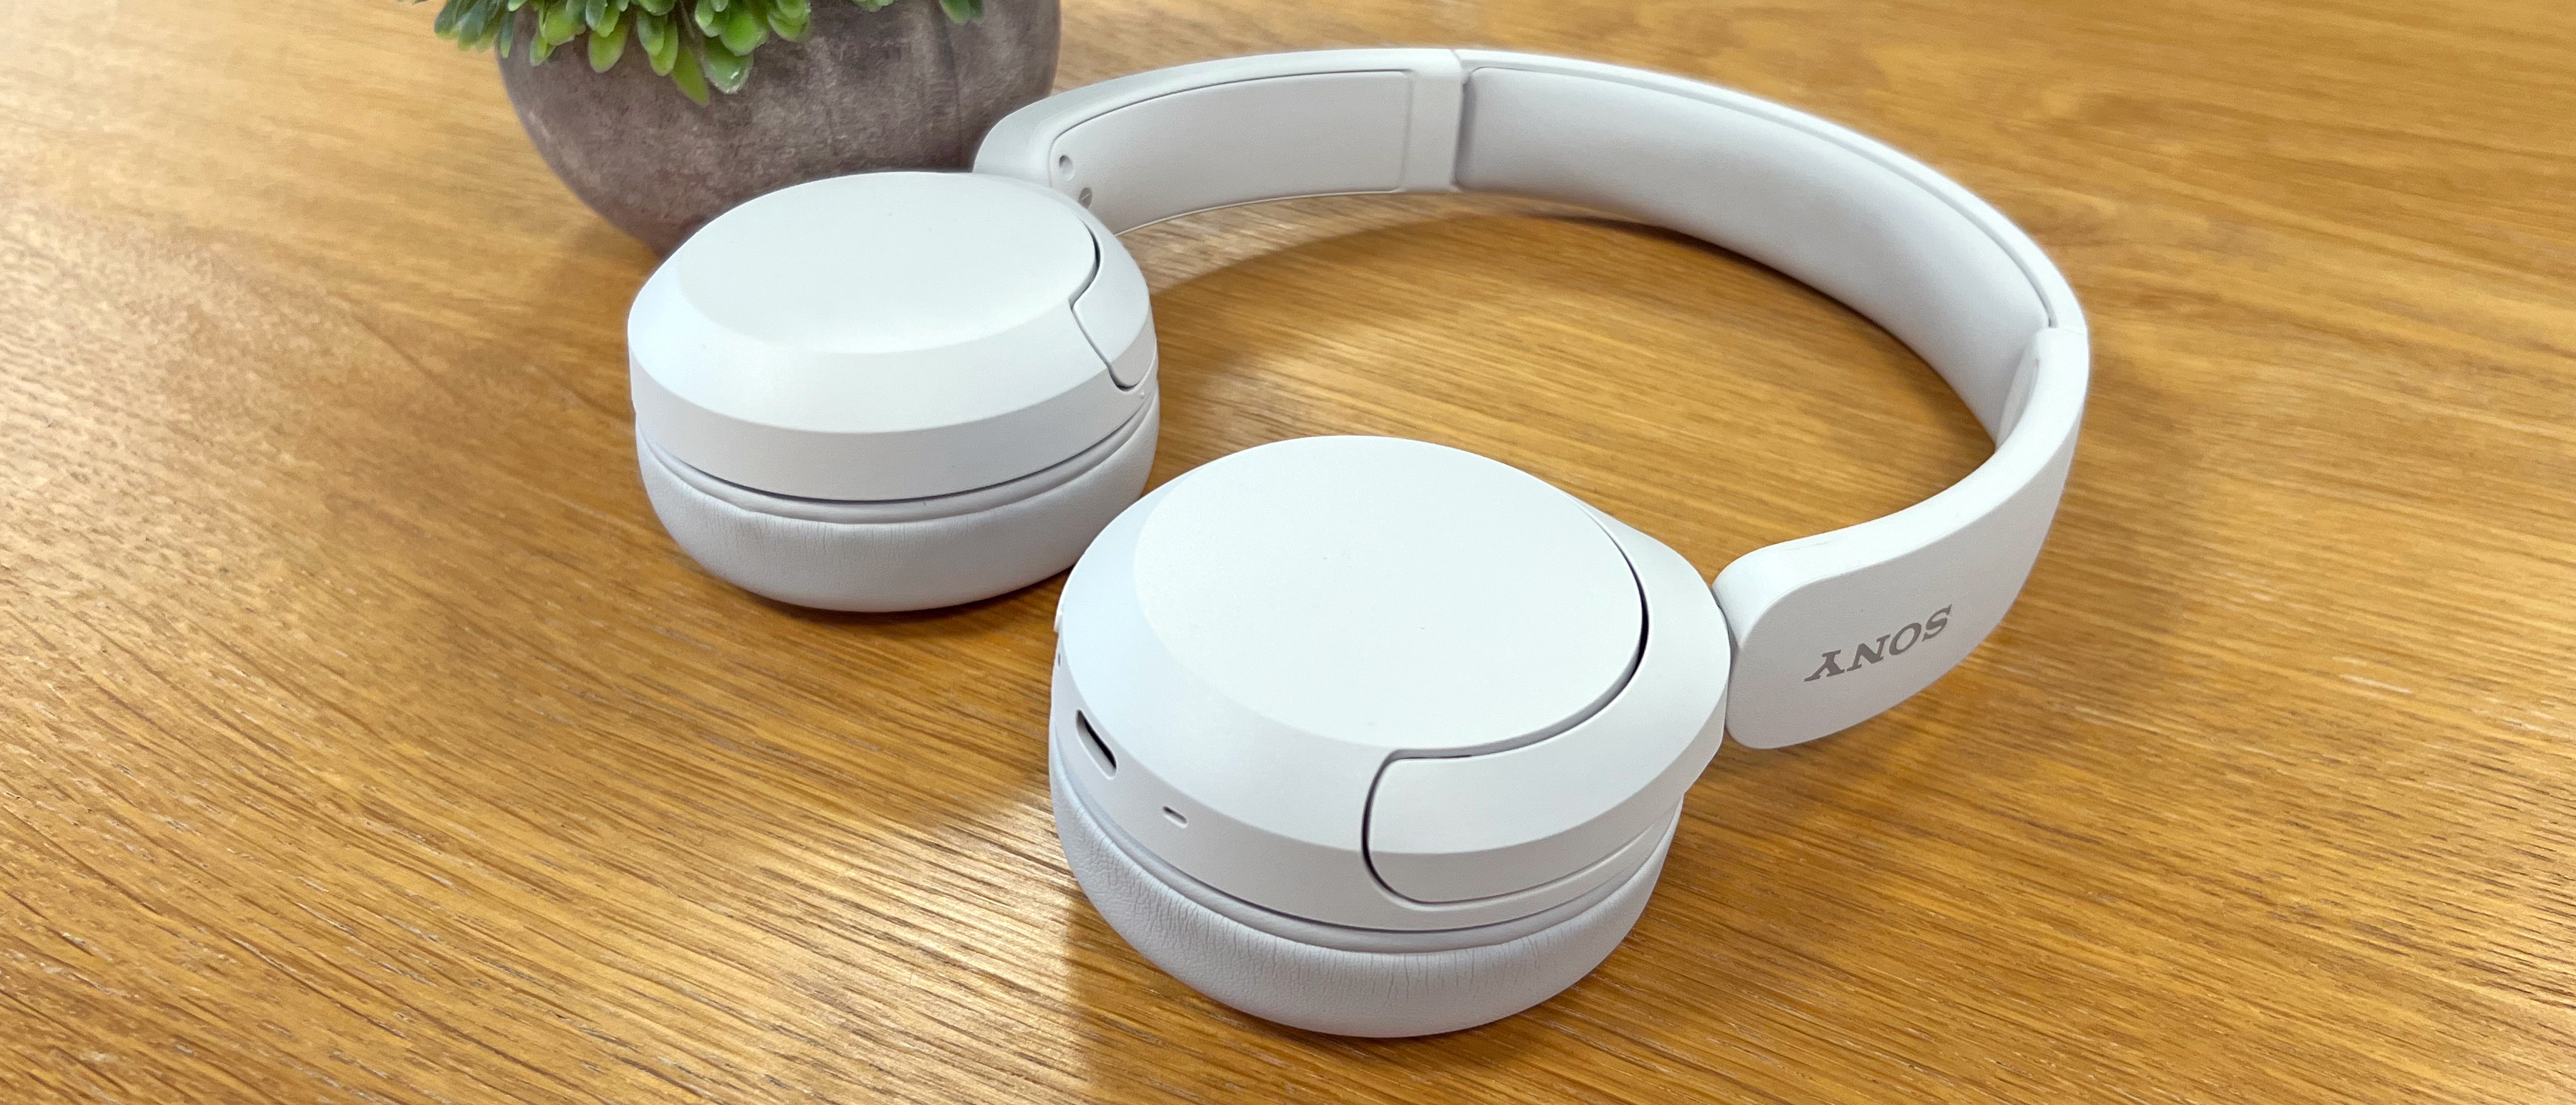 How to use your Sony WH-CH520 Wireless Headphones